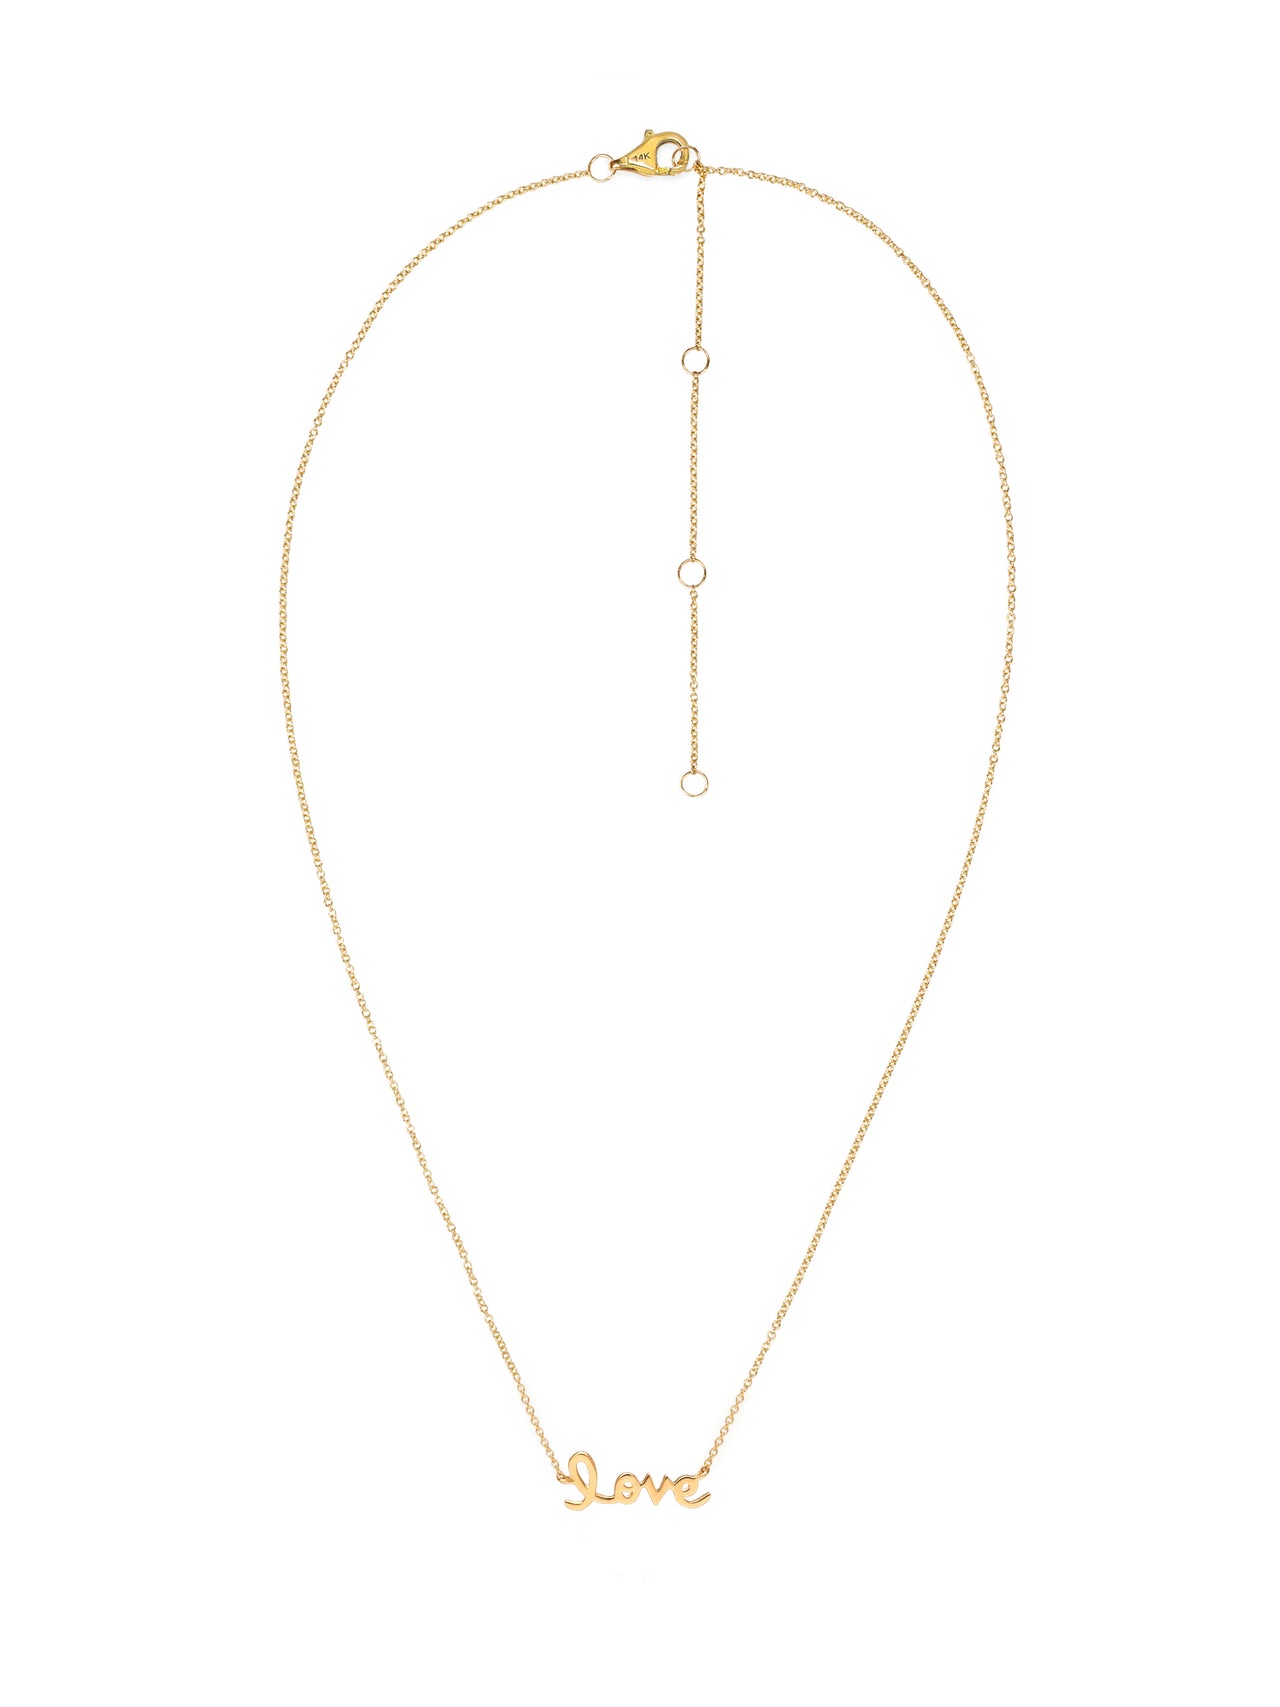 14k Yellow Gold Love Necklace